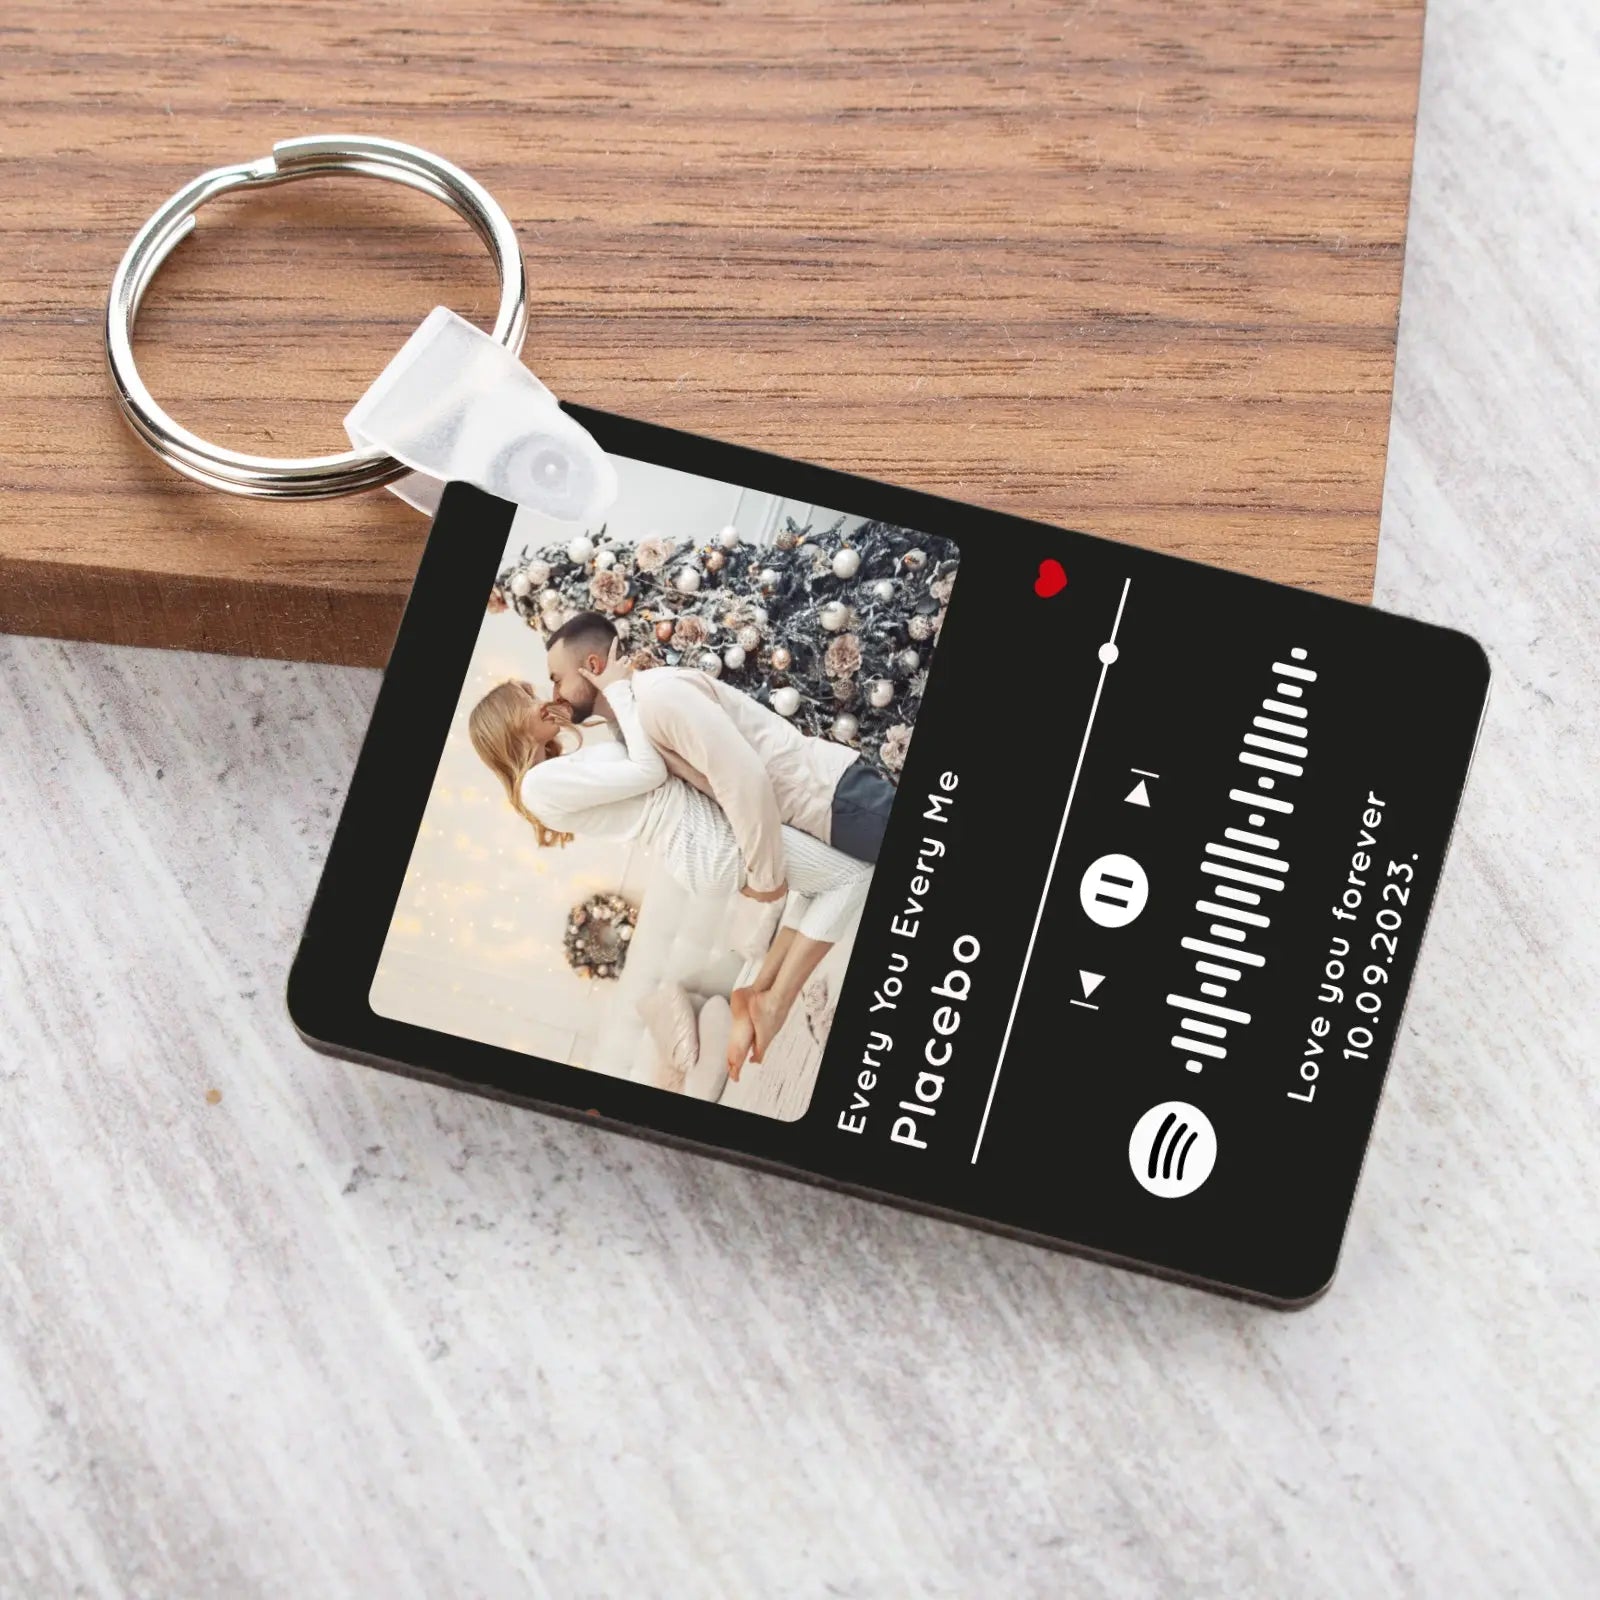 Personalised Spotify Code Keychain Plaque, Custom Engraved Acrylic Song Album Cover with Photo, Customized Music Picture Keyring 70X50mm - CushionPop